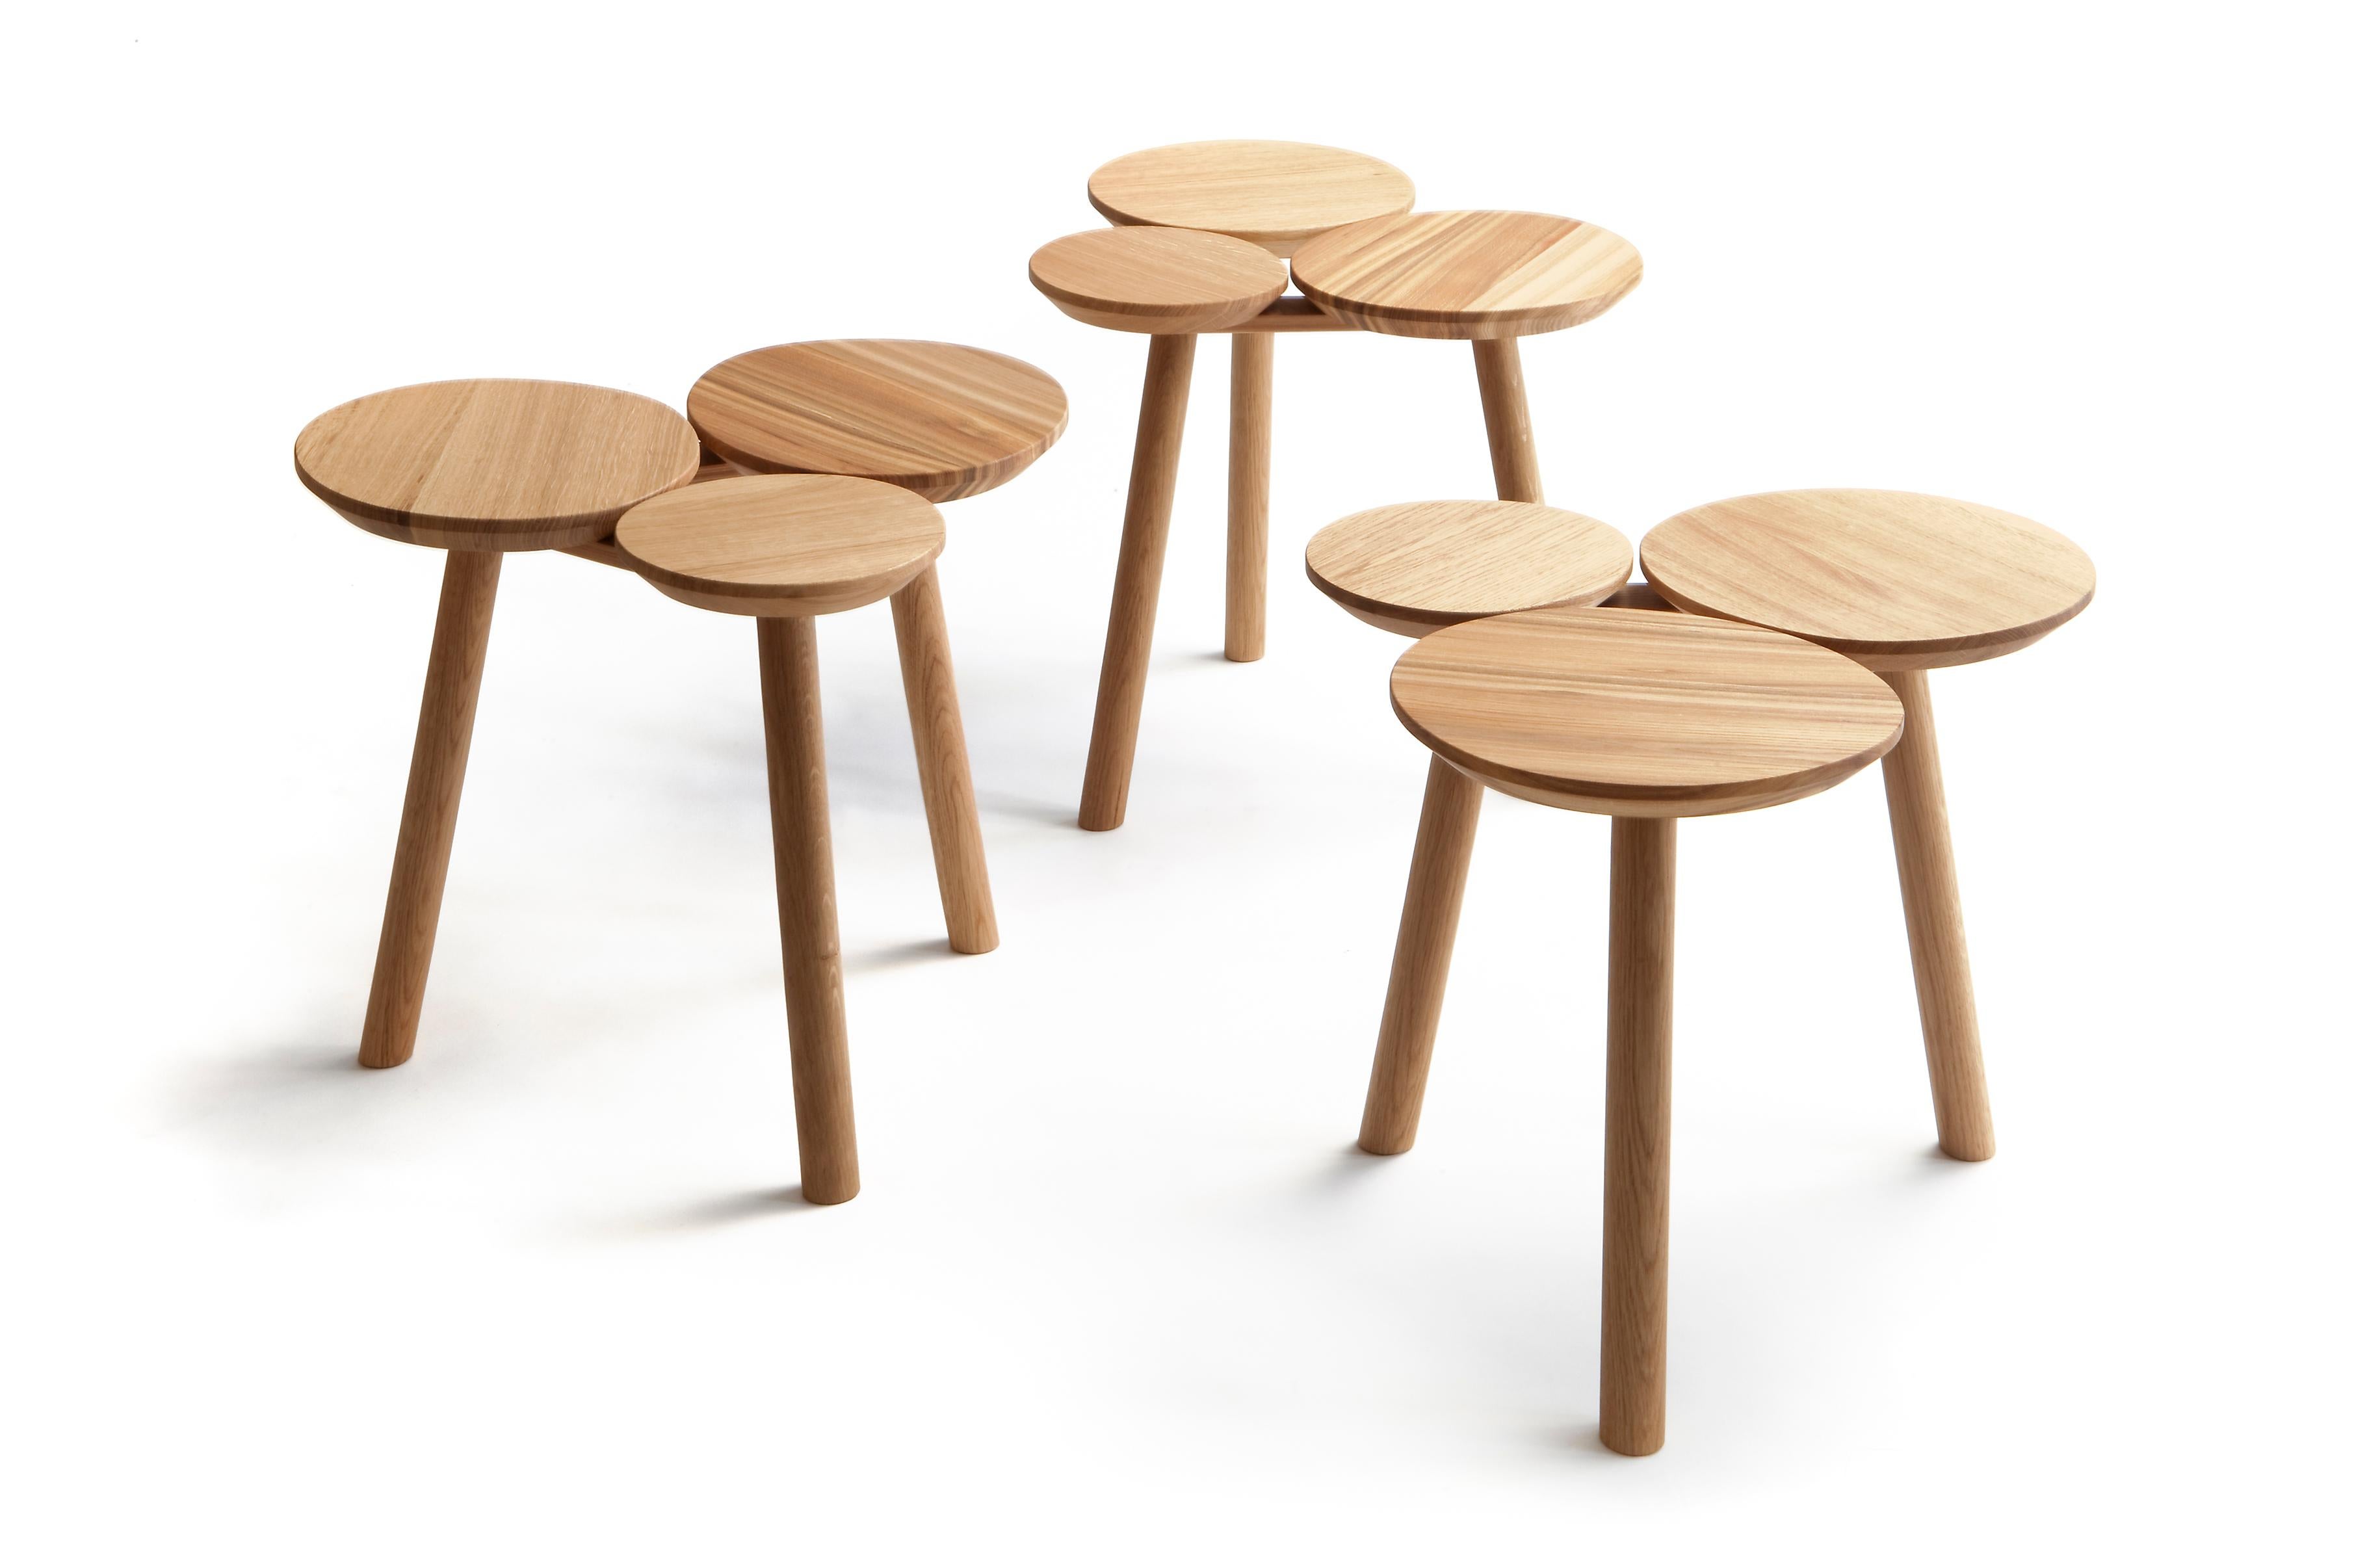 Nao Tamura designed the July stool-table thinking about the log piles in the forest. The round, organic shapes of the product make it easy to combine many together, or use just one.
Materials
Oak 

Surface
Natural wood oil mix

Dimensions
Width 460